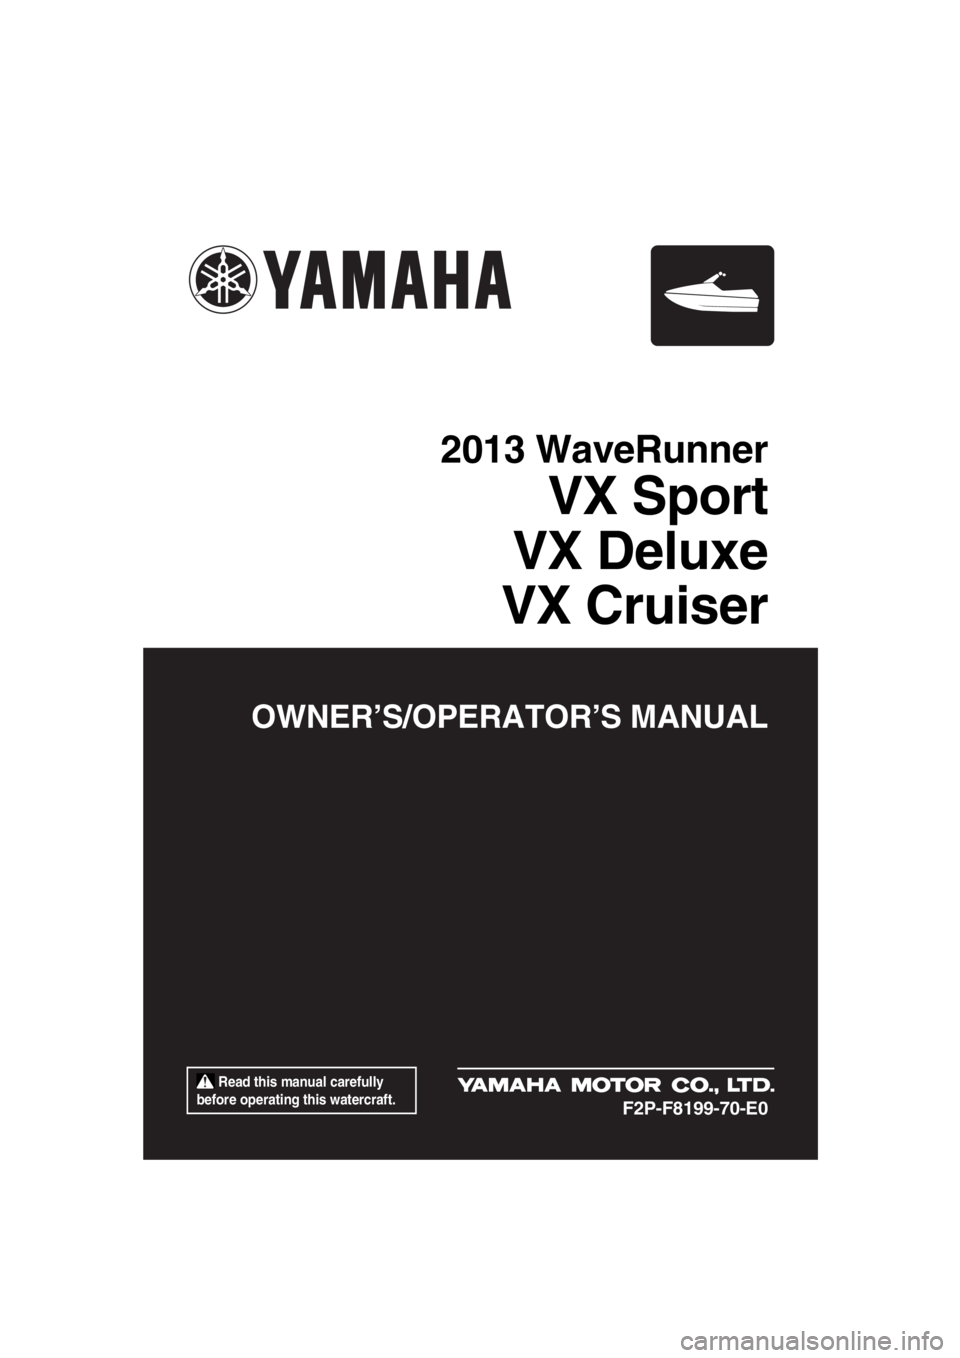 YAMAHA VX 2013  Owners Manual  Read this manual carefully 
before operating this watercraft.
OWNER’S/OPERATOR’S MANUAL
2013 WaveRunner
VX Sport
VX Deluxe
VX Cruiser
F2P-F8199-70-E0
UF2P70E0.book  Page 1  Tuesday, July 31, 2012